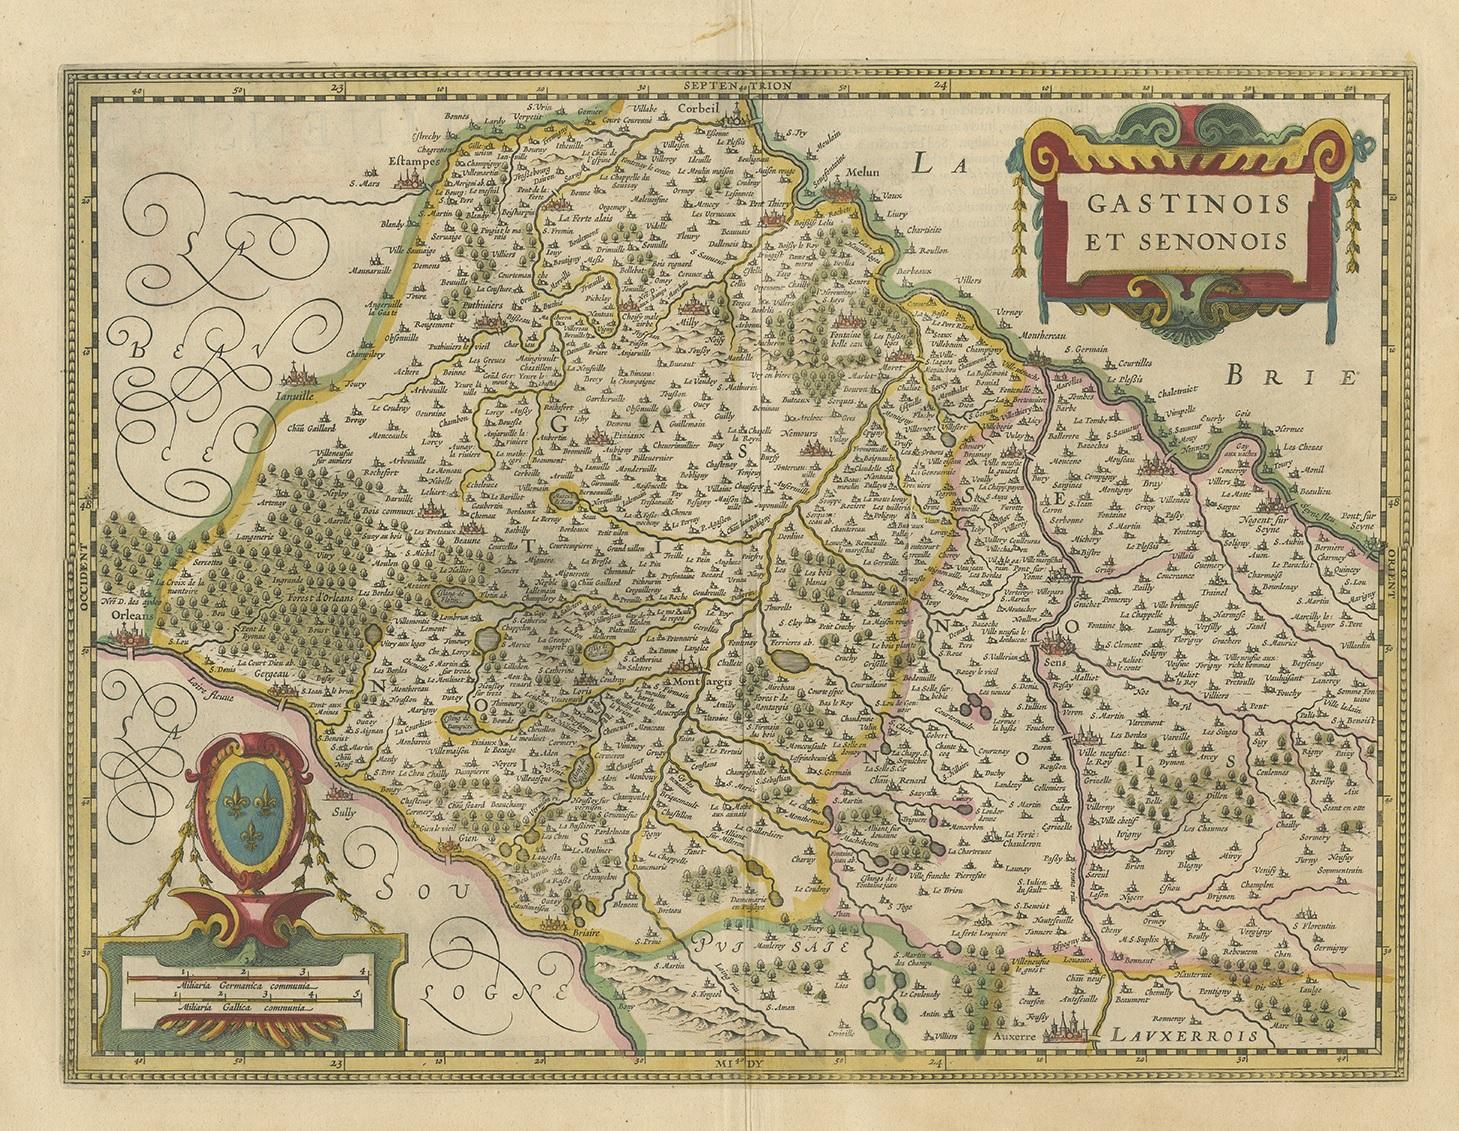 Antique map titled 'Gastinois et Senonois'. Old map of the region of Étampes and Sens, France. It shows the cities of Sens, Melun, Étampes, Orleans, Fontainebleau, Montargis and others. This map originates from a composite atlas and most likely